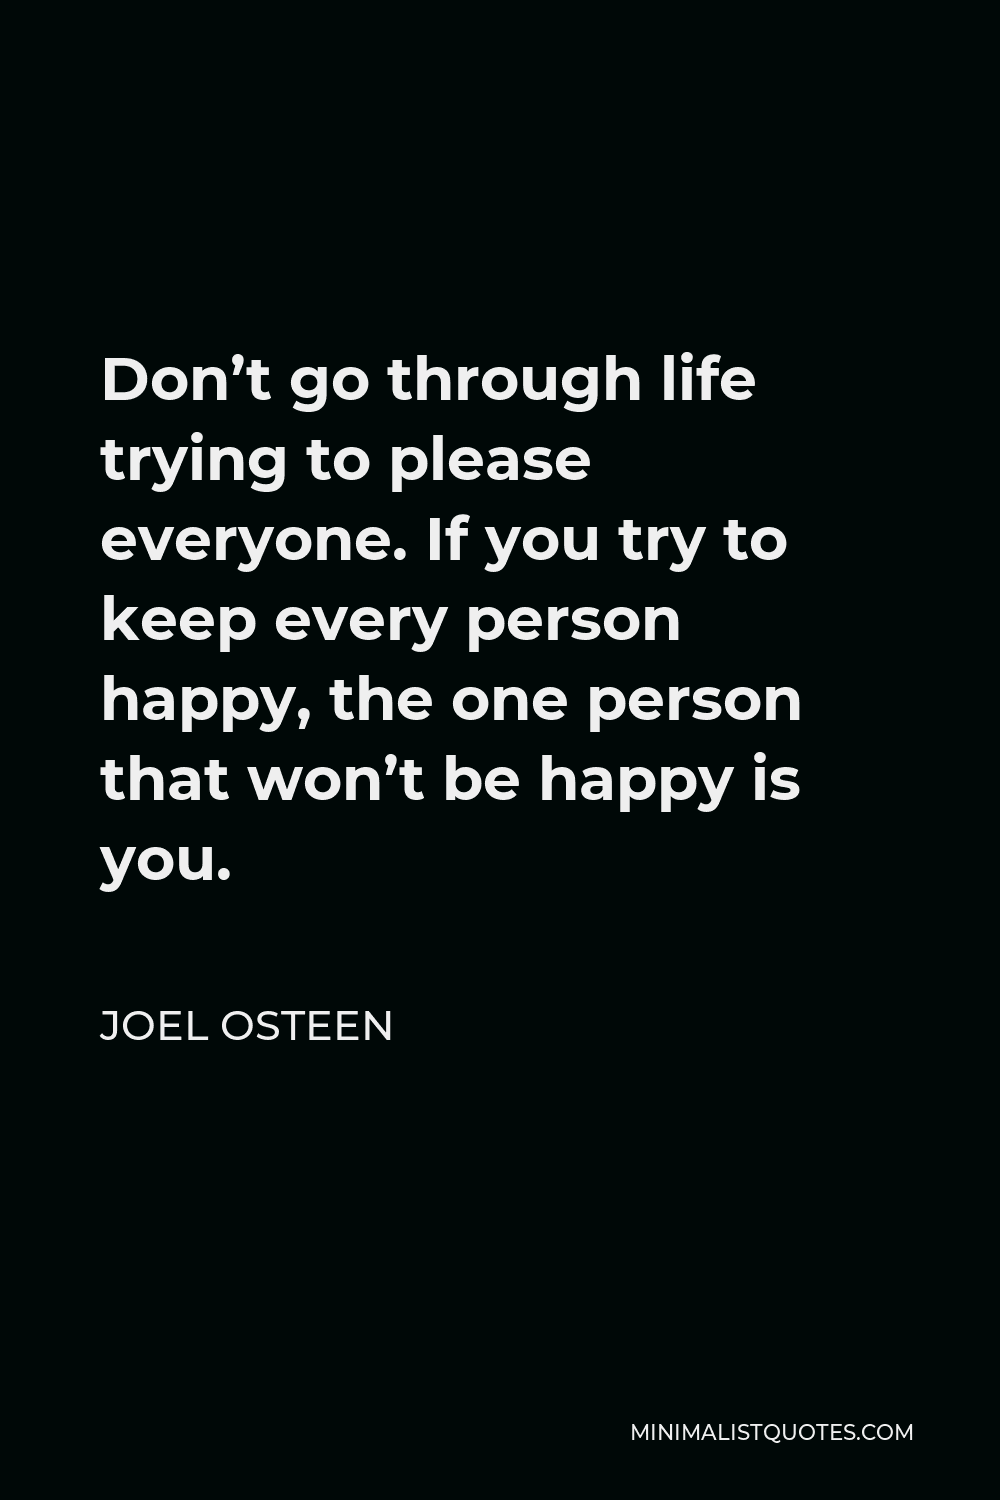 Joel Osteen Quote: Don't go through life trying to please everyone. If you  try to keep every person happy, the one person that won't be happy is you.